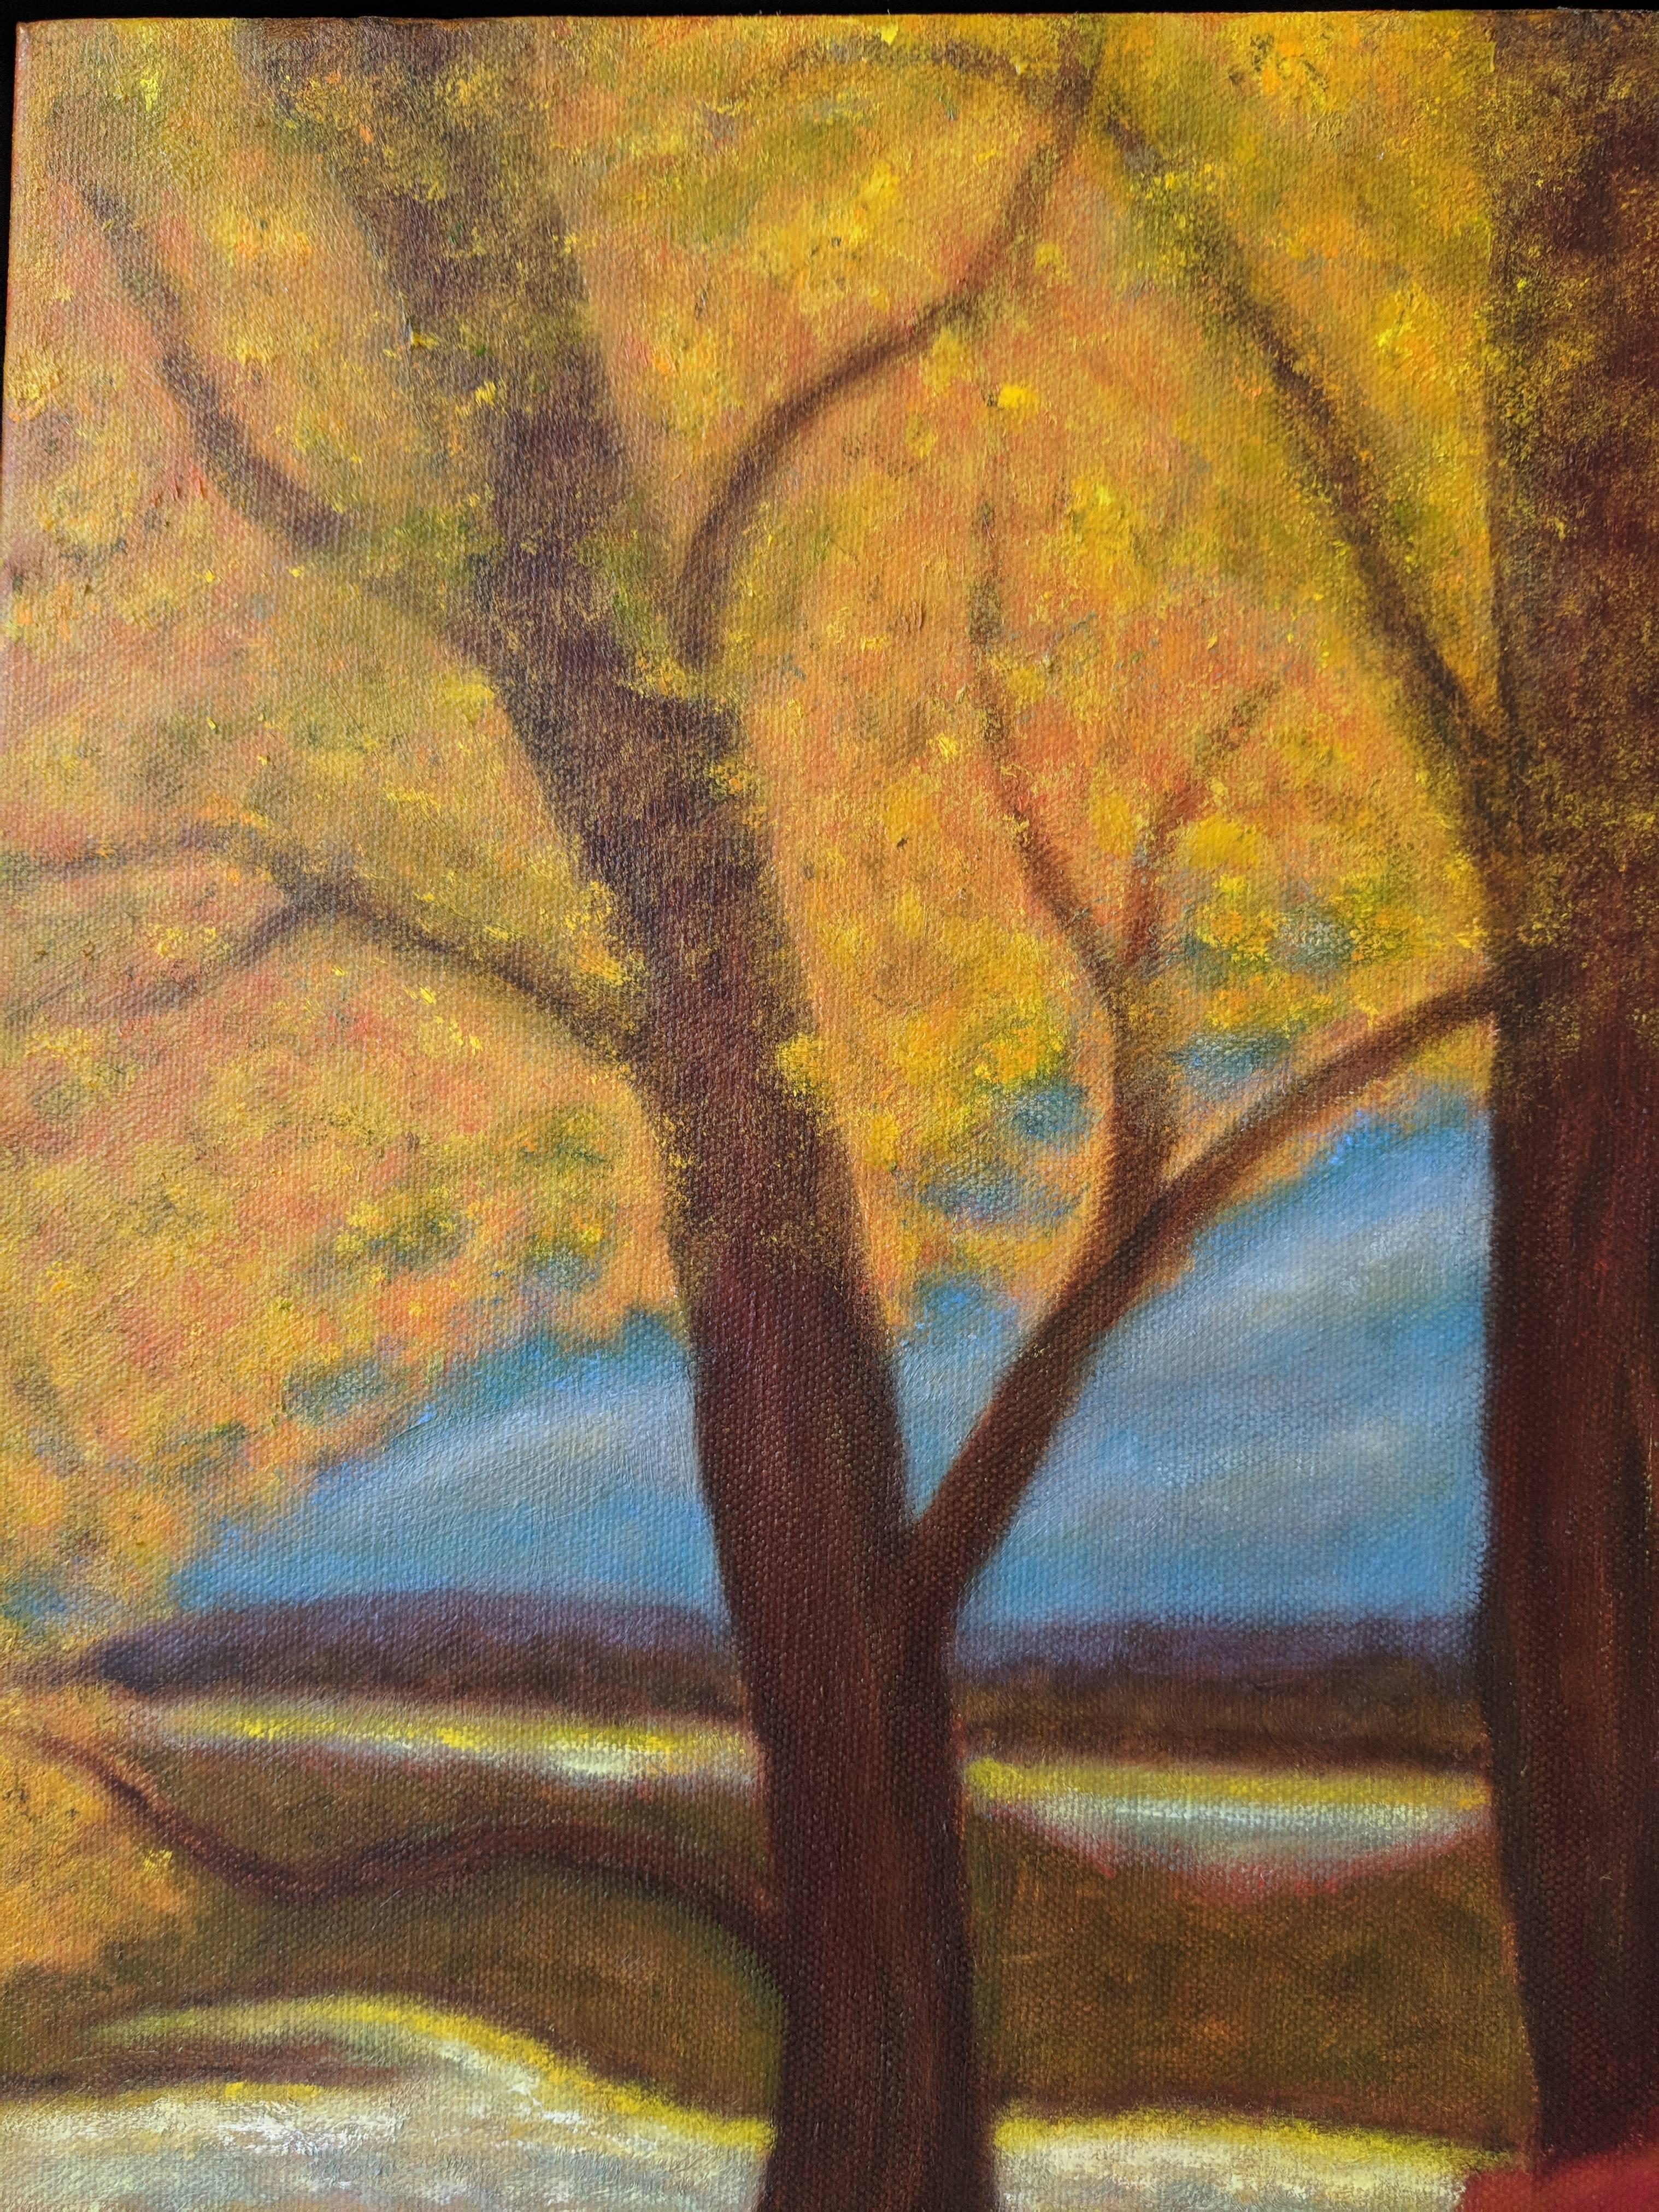 Oil on Canvas Painting -- Autumn Reverie - Brown Figurative Painting by Gary Masline